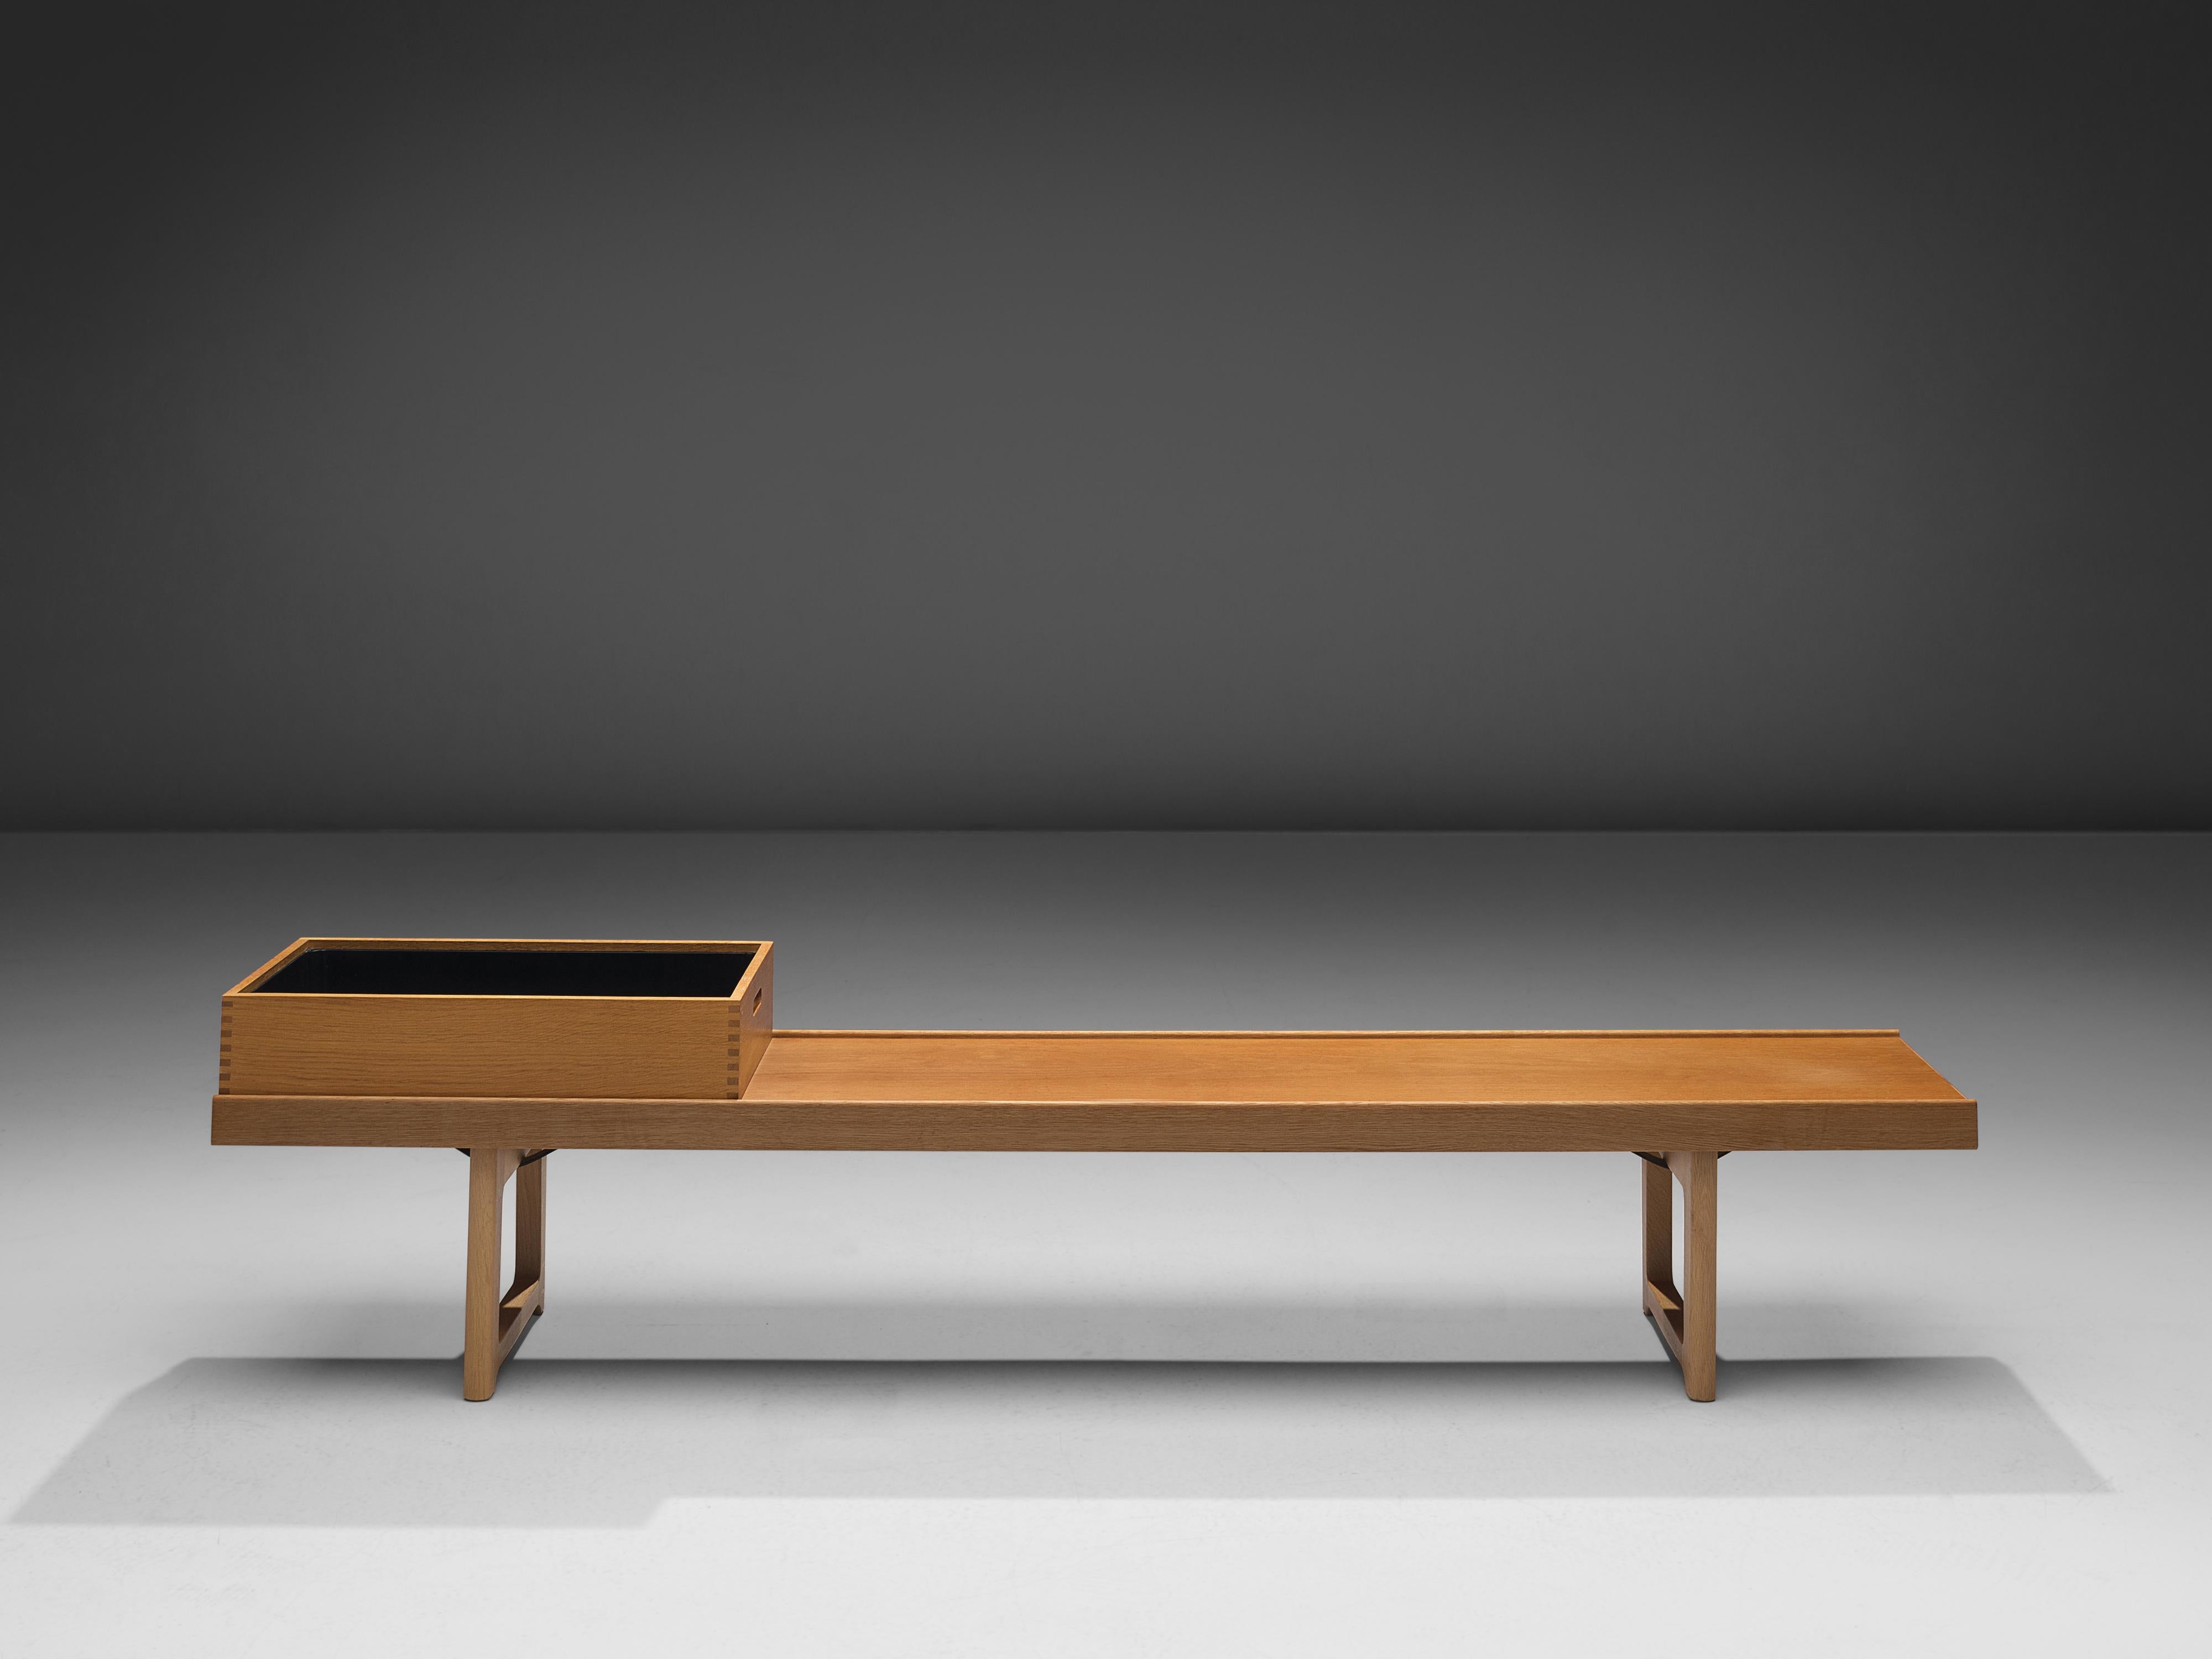 Torbjørn Afdal for Burksbo Mellemstrands Trevareindistri AS, 'Krobo' bench or side table, oak, metal, Norway, 1960s

This iconic bench or coffee table by Afdal is executed in oak and comes with one box that can be used as a tray too. Two legs with